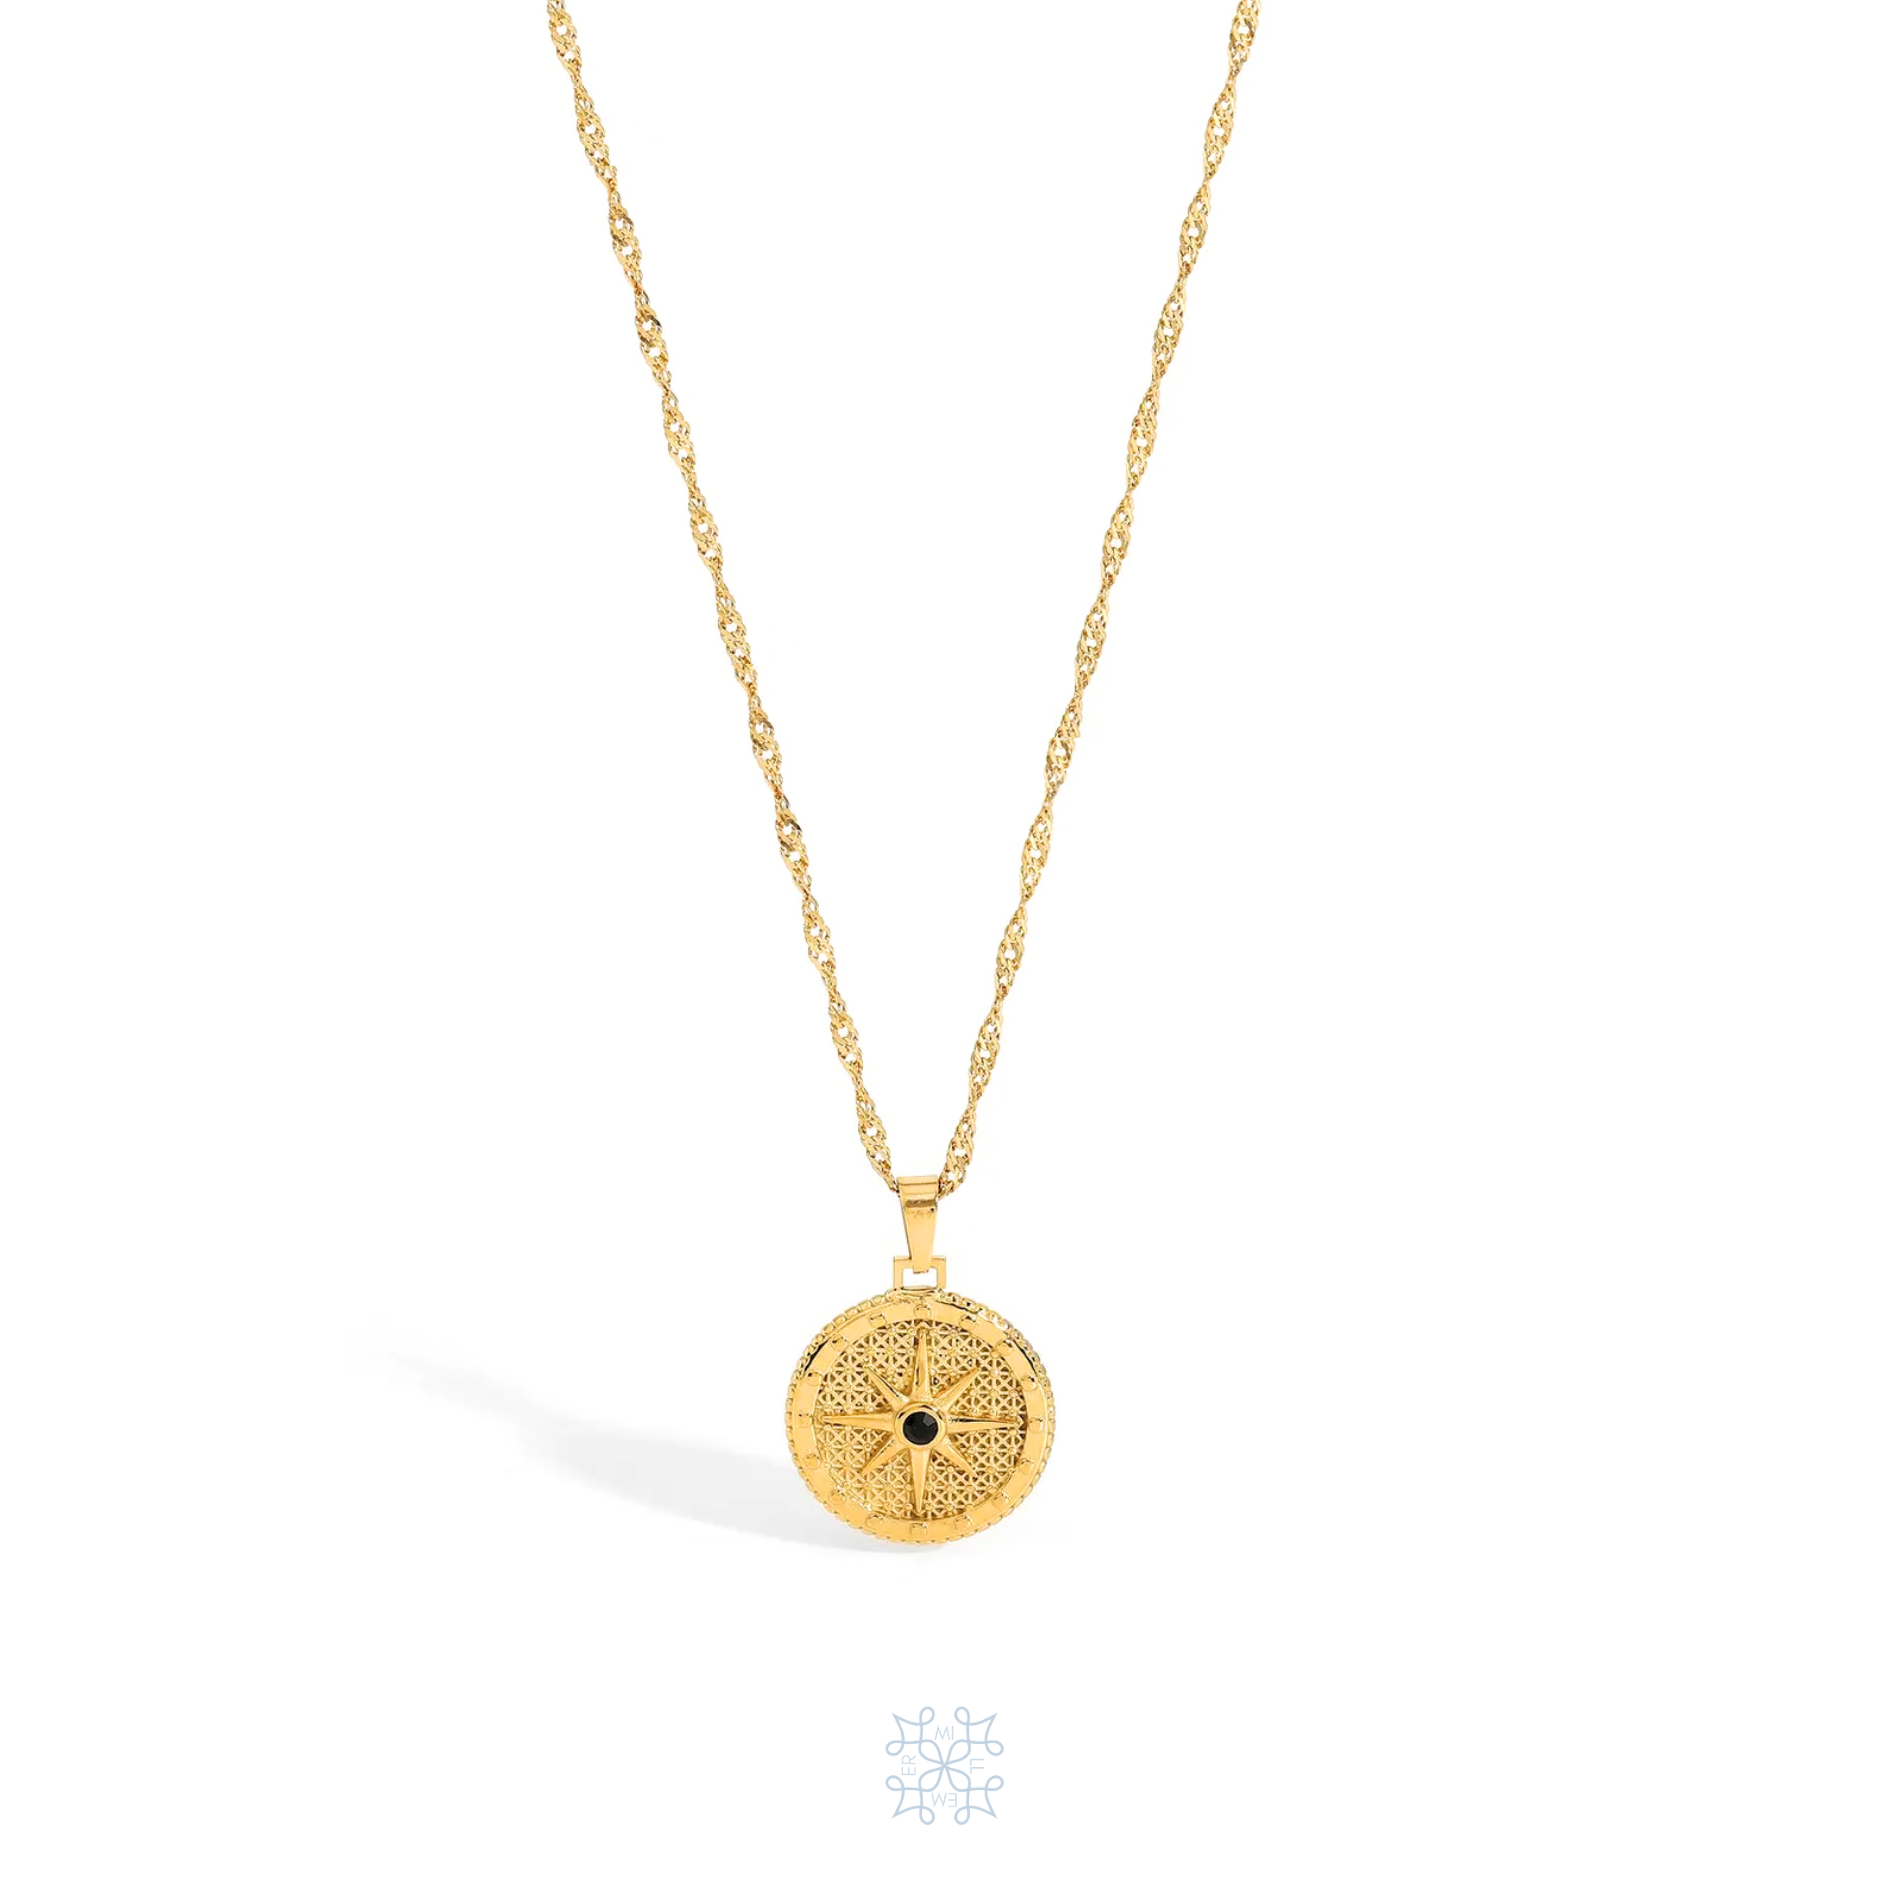 Circle Round waterproof pendant. Compass gold pendnat. Gold chain. The pandant is droped on the chain. A black zircon is in the moddle of the pendant. Compass Pendant Gold Necklace.